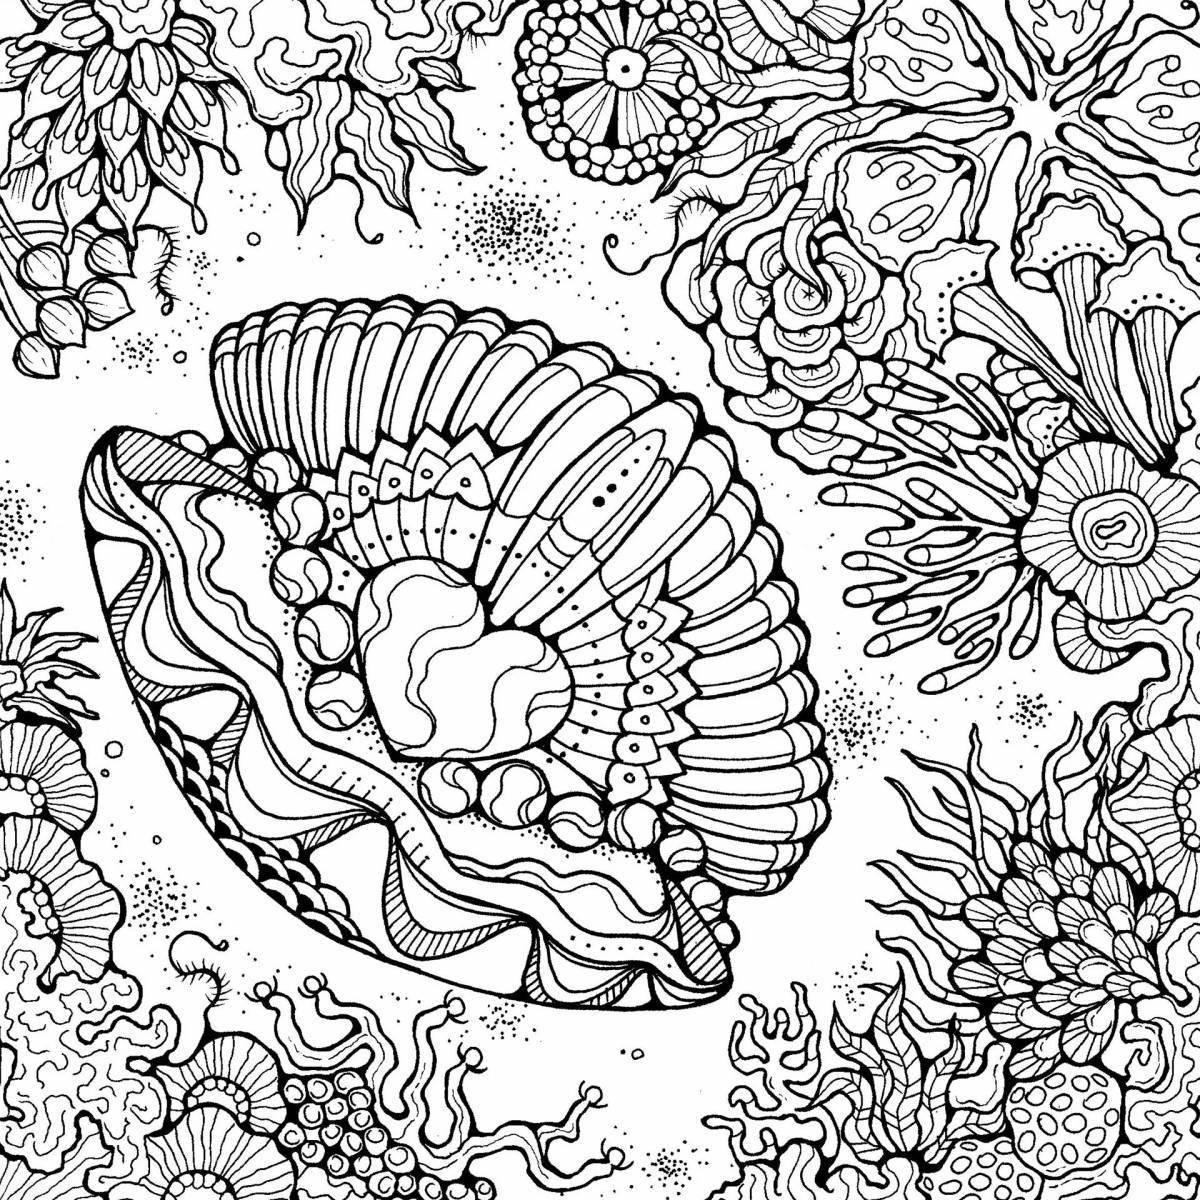 Awesome unusual coloring book